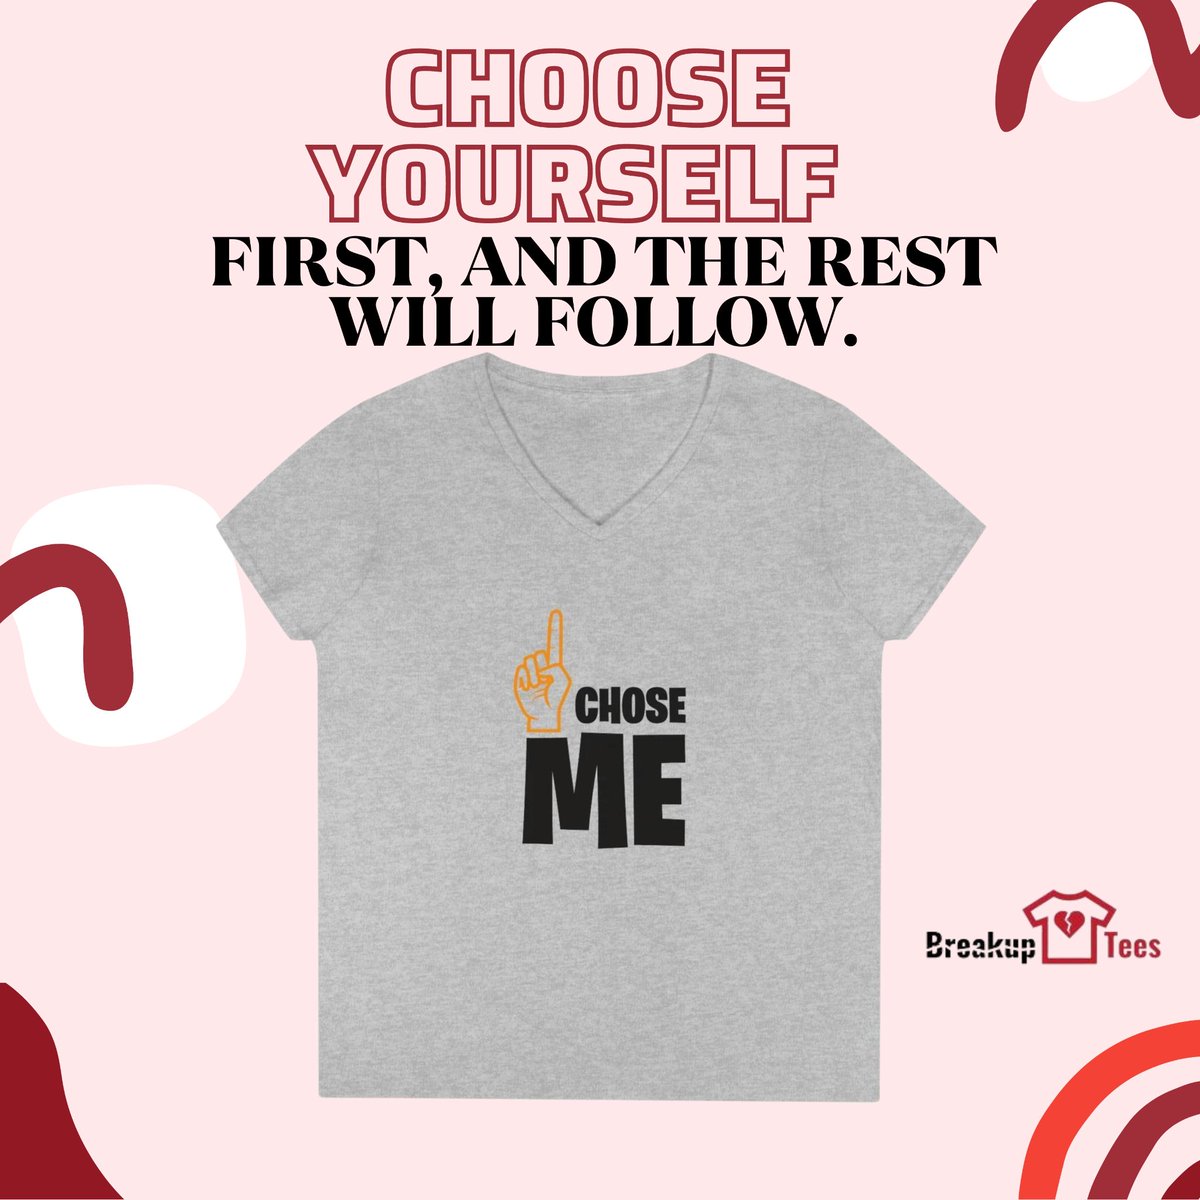 Ready to start your journey toward healing and self-love? 
Our Ladies’ V-neck T-shirt with the empowering message 'Choose Me' is a perfect choice!

To place your order for this shirt, click: breakuptees.com/products/ladie… 
.
#teeshirts #tshirtlover #teeshirt #tshirtviral